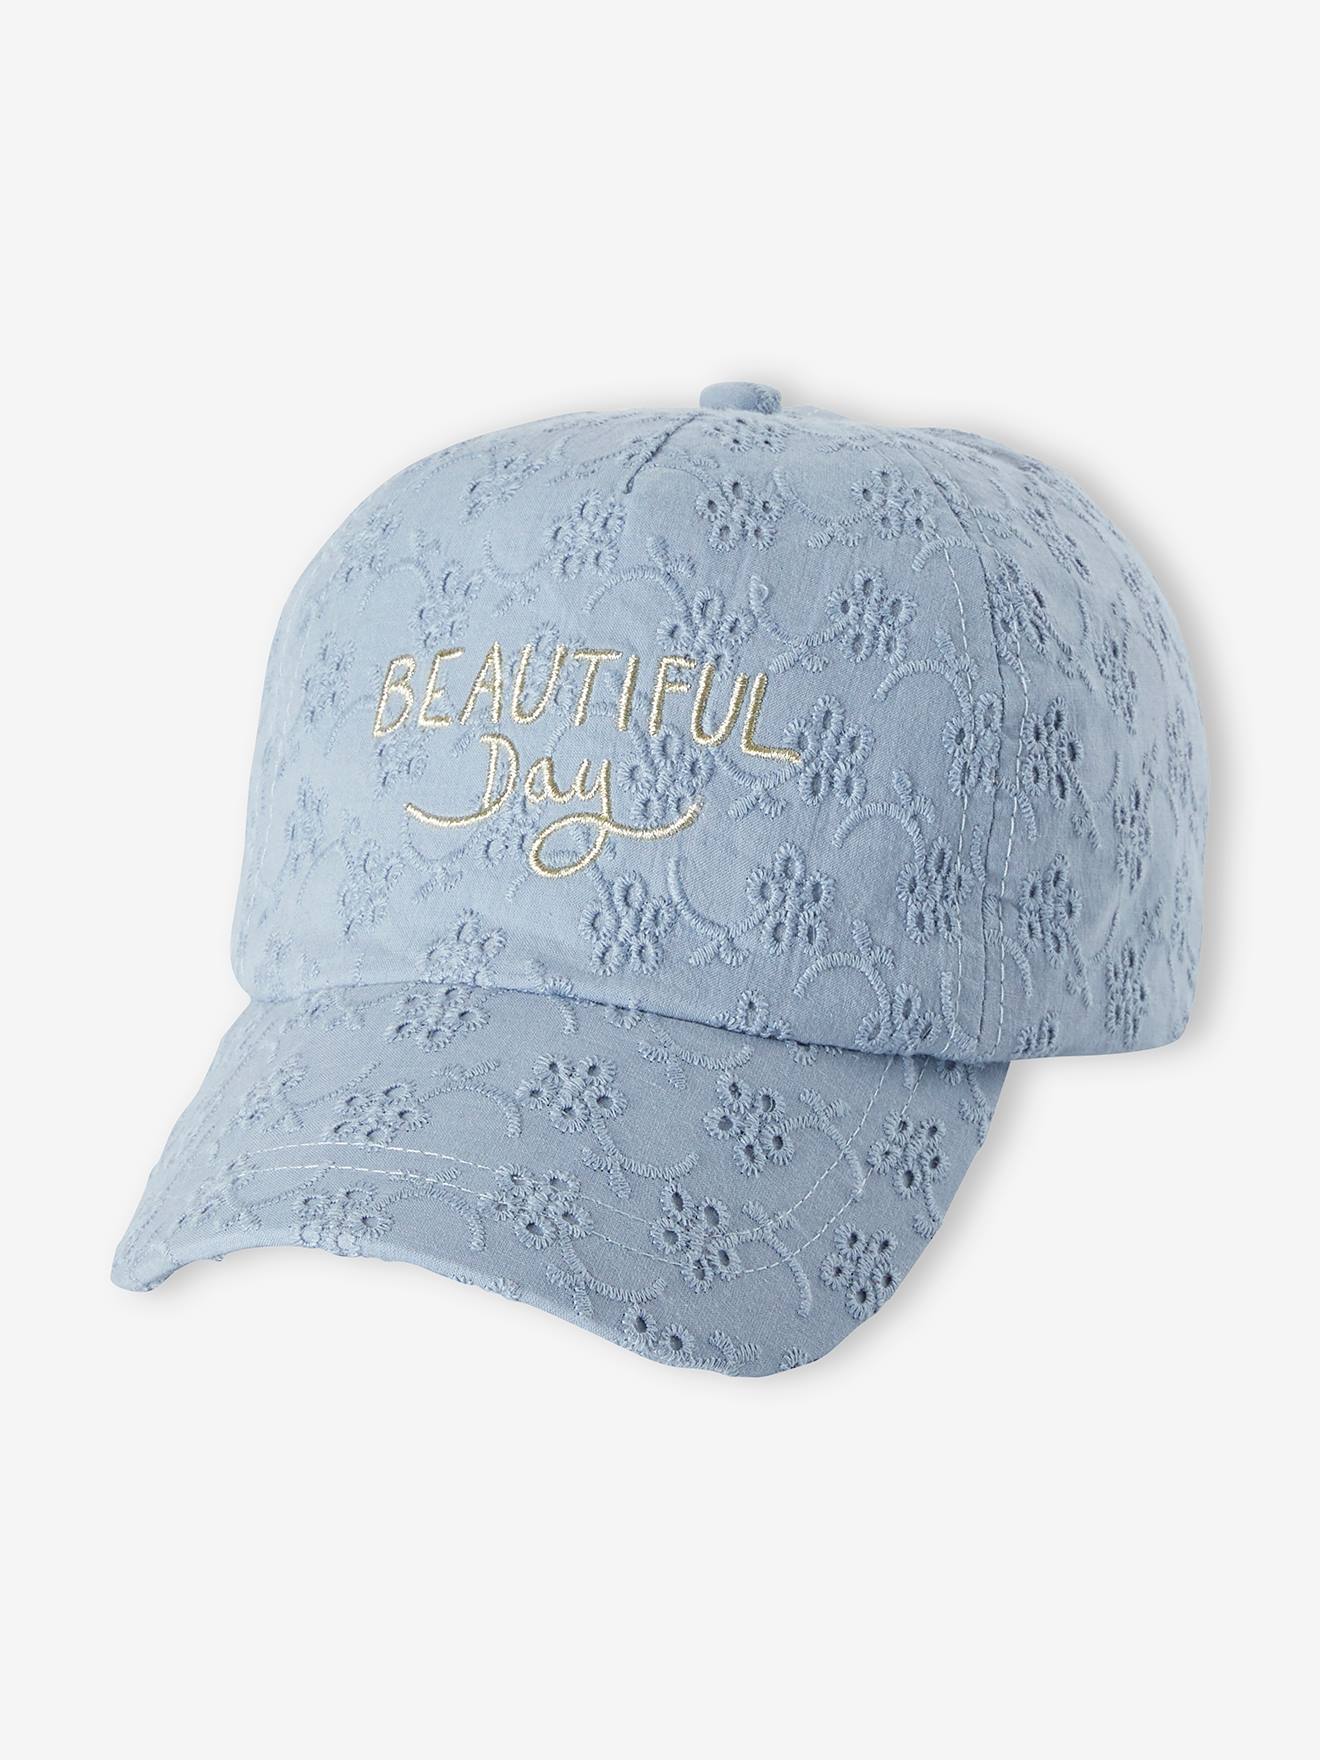 Casquette fille broderie anglaise bleu